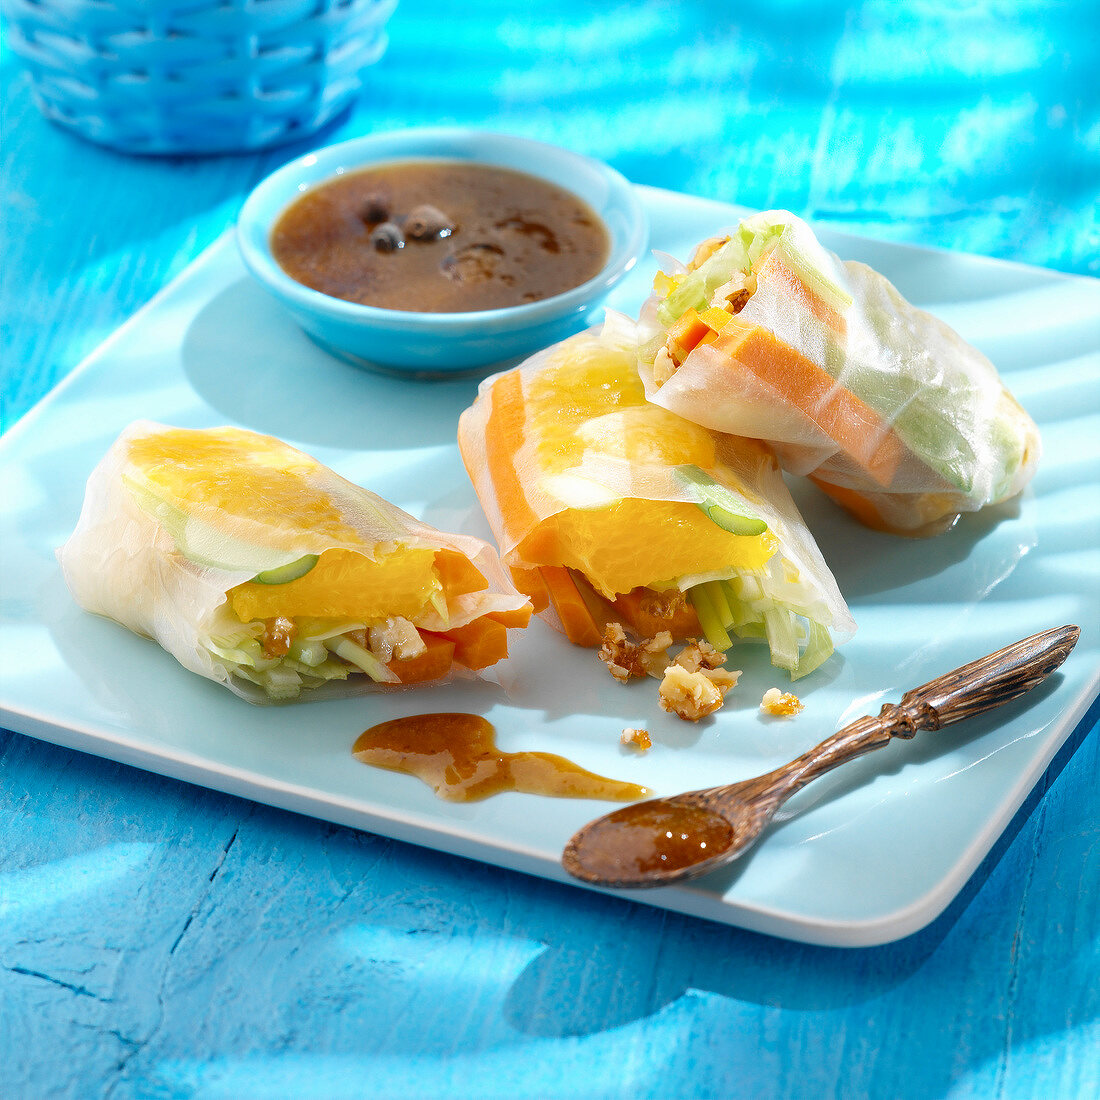 Vegetable spring rolls,sweet and sour sauce